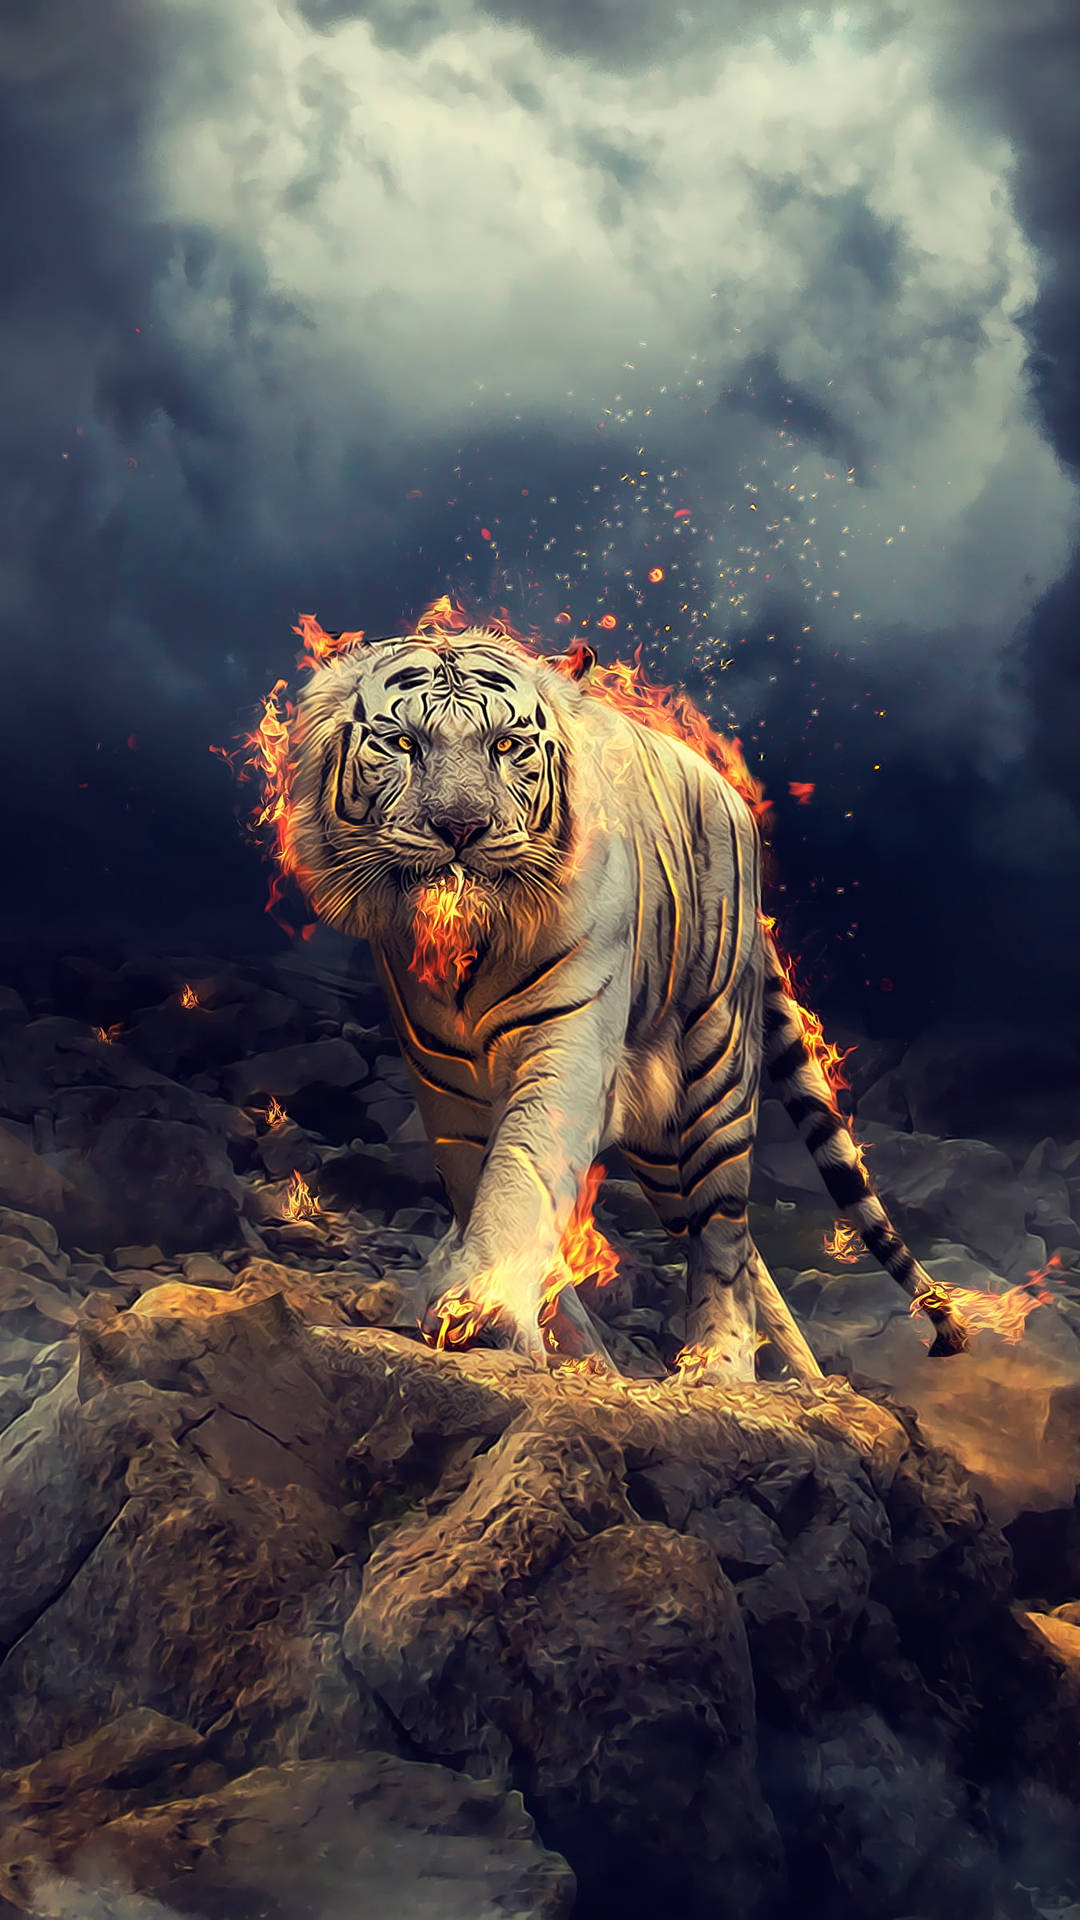 Cool Tiger Art With Fiery Embers Wallpaper